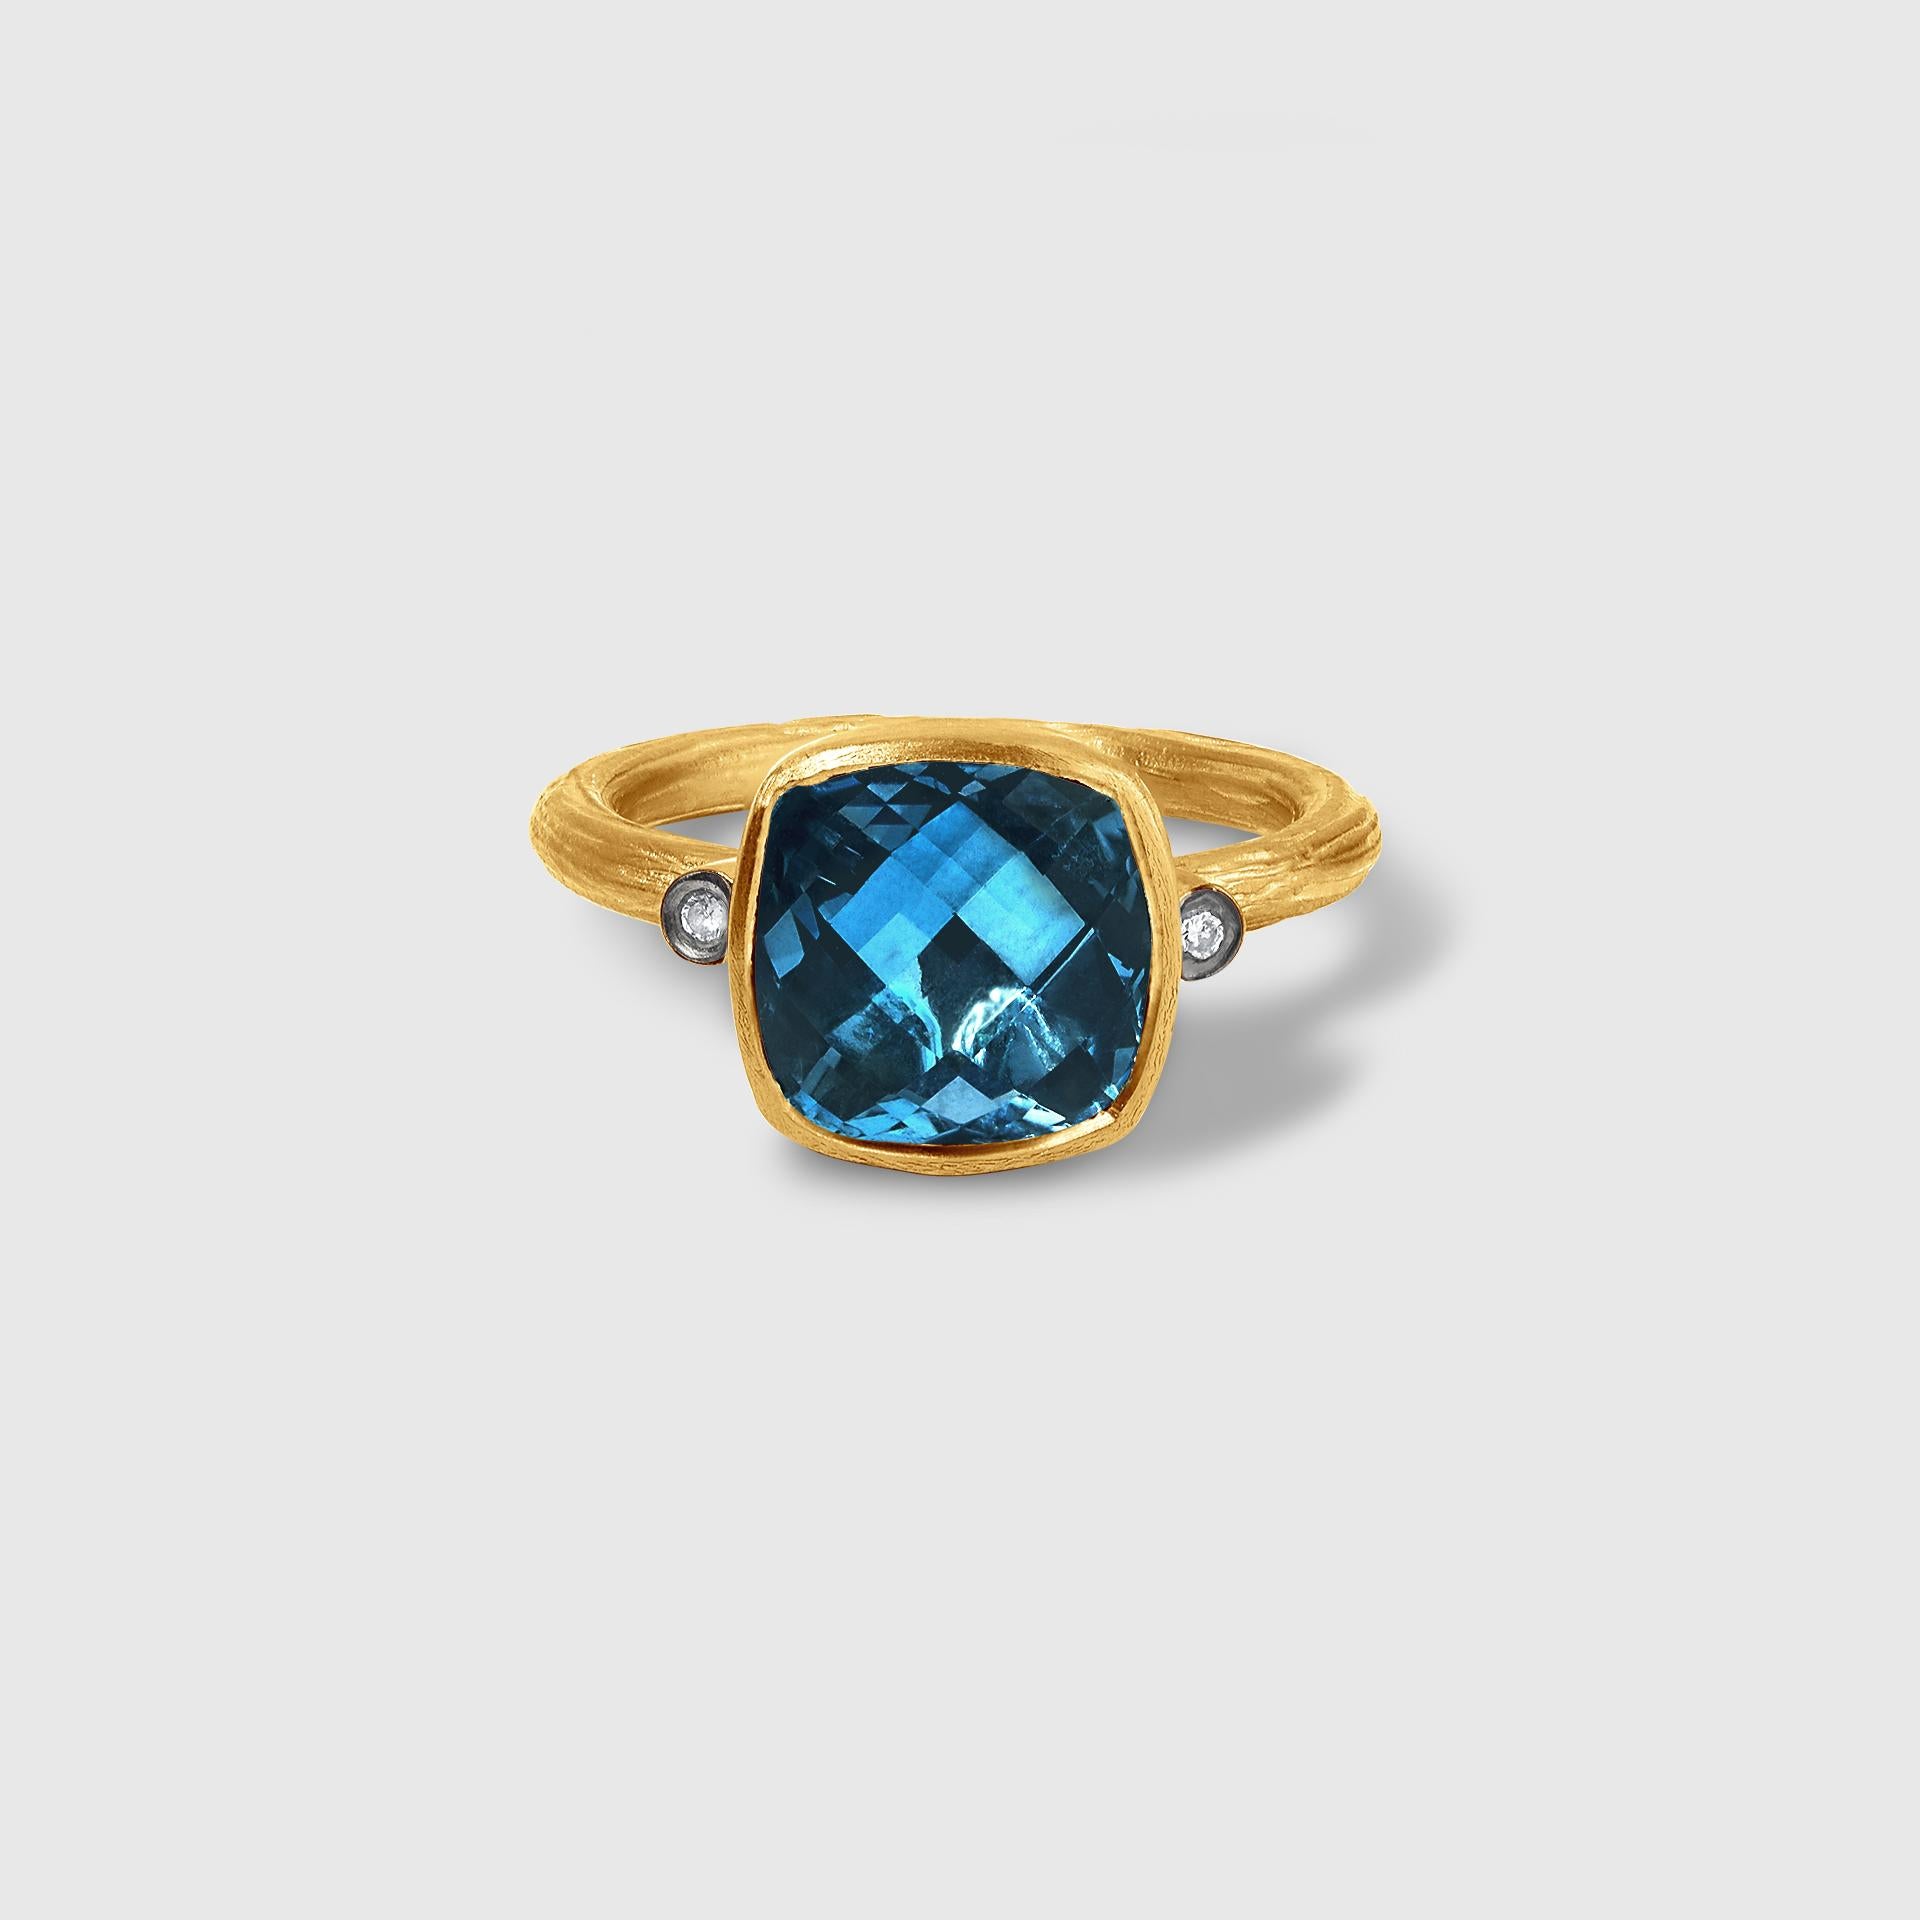 Byzantine 5.74ct Faceted Checkerboard London Blue Topaz & Diamond Ring 24kt Gold & Silver For Sale